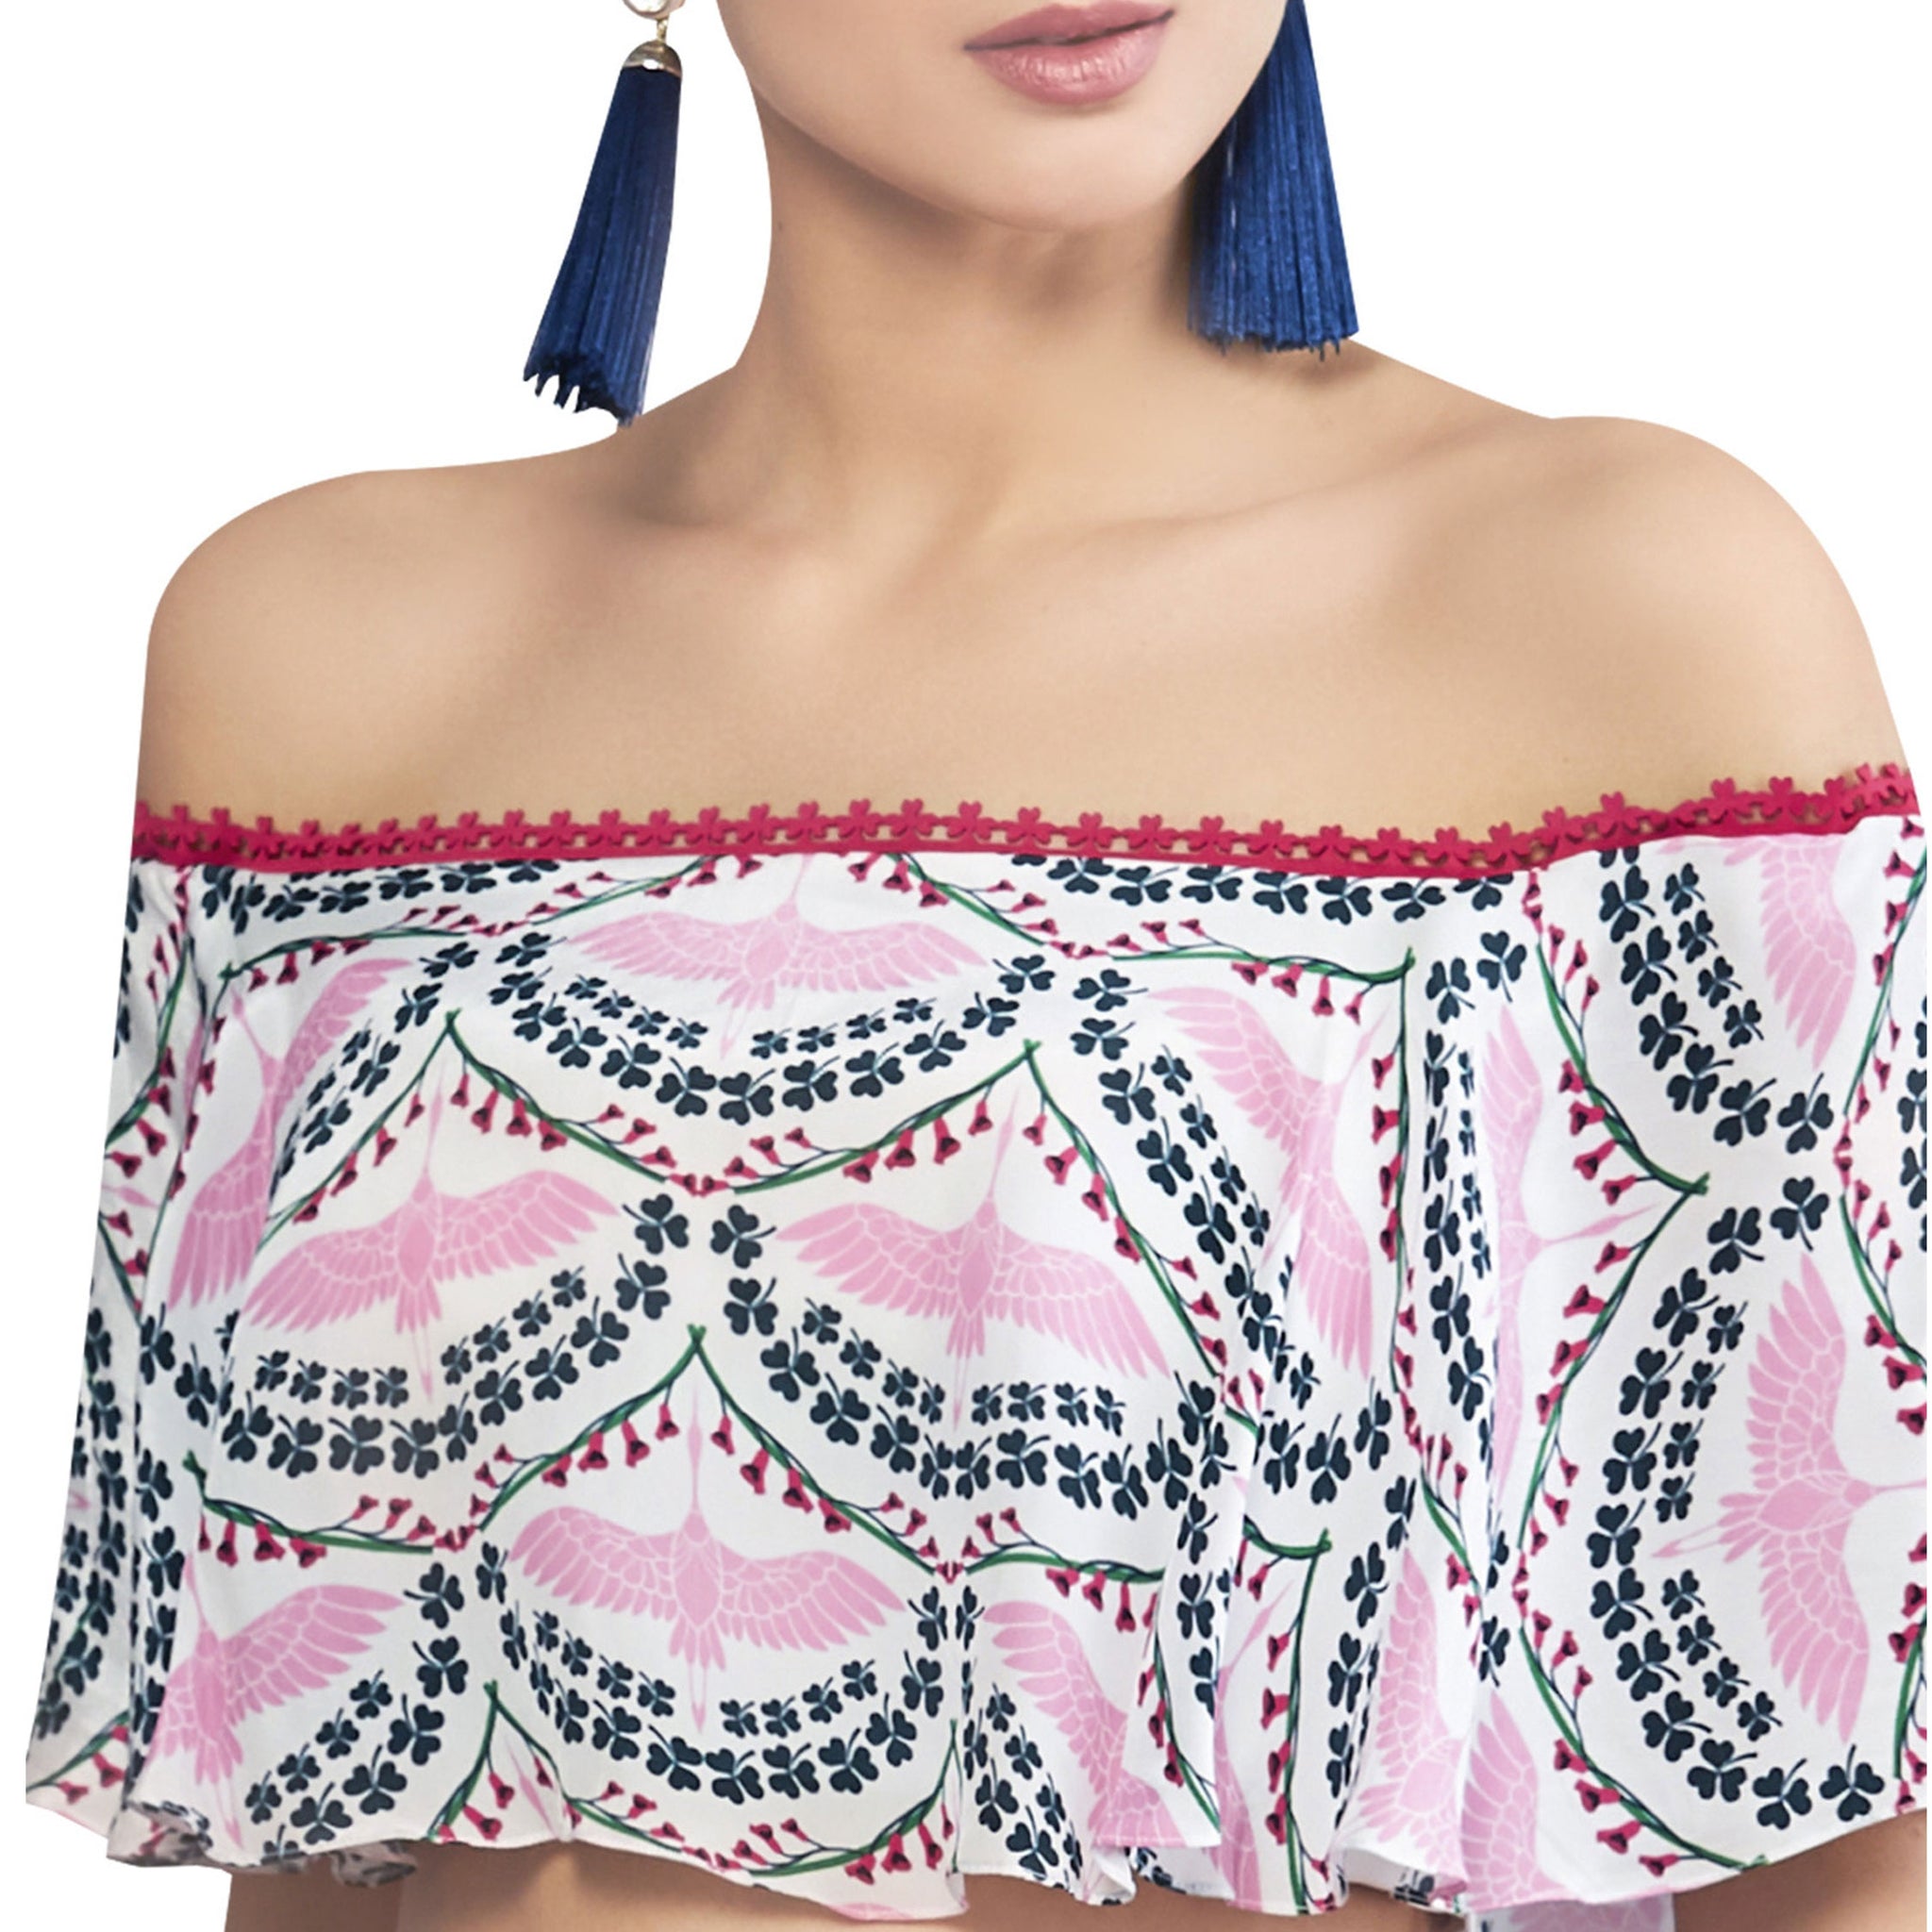 Embroidered Printed Crop Top Set